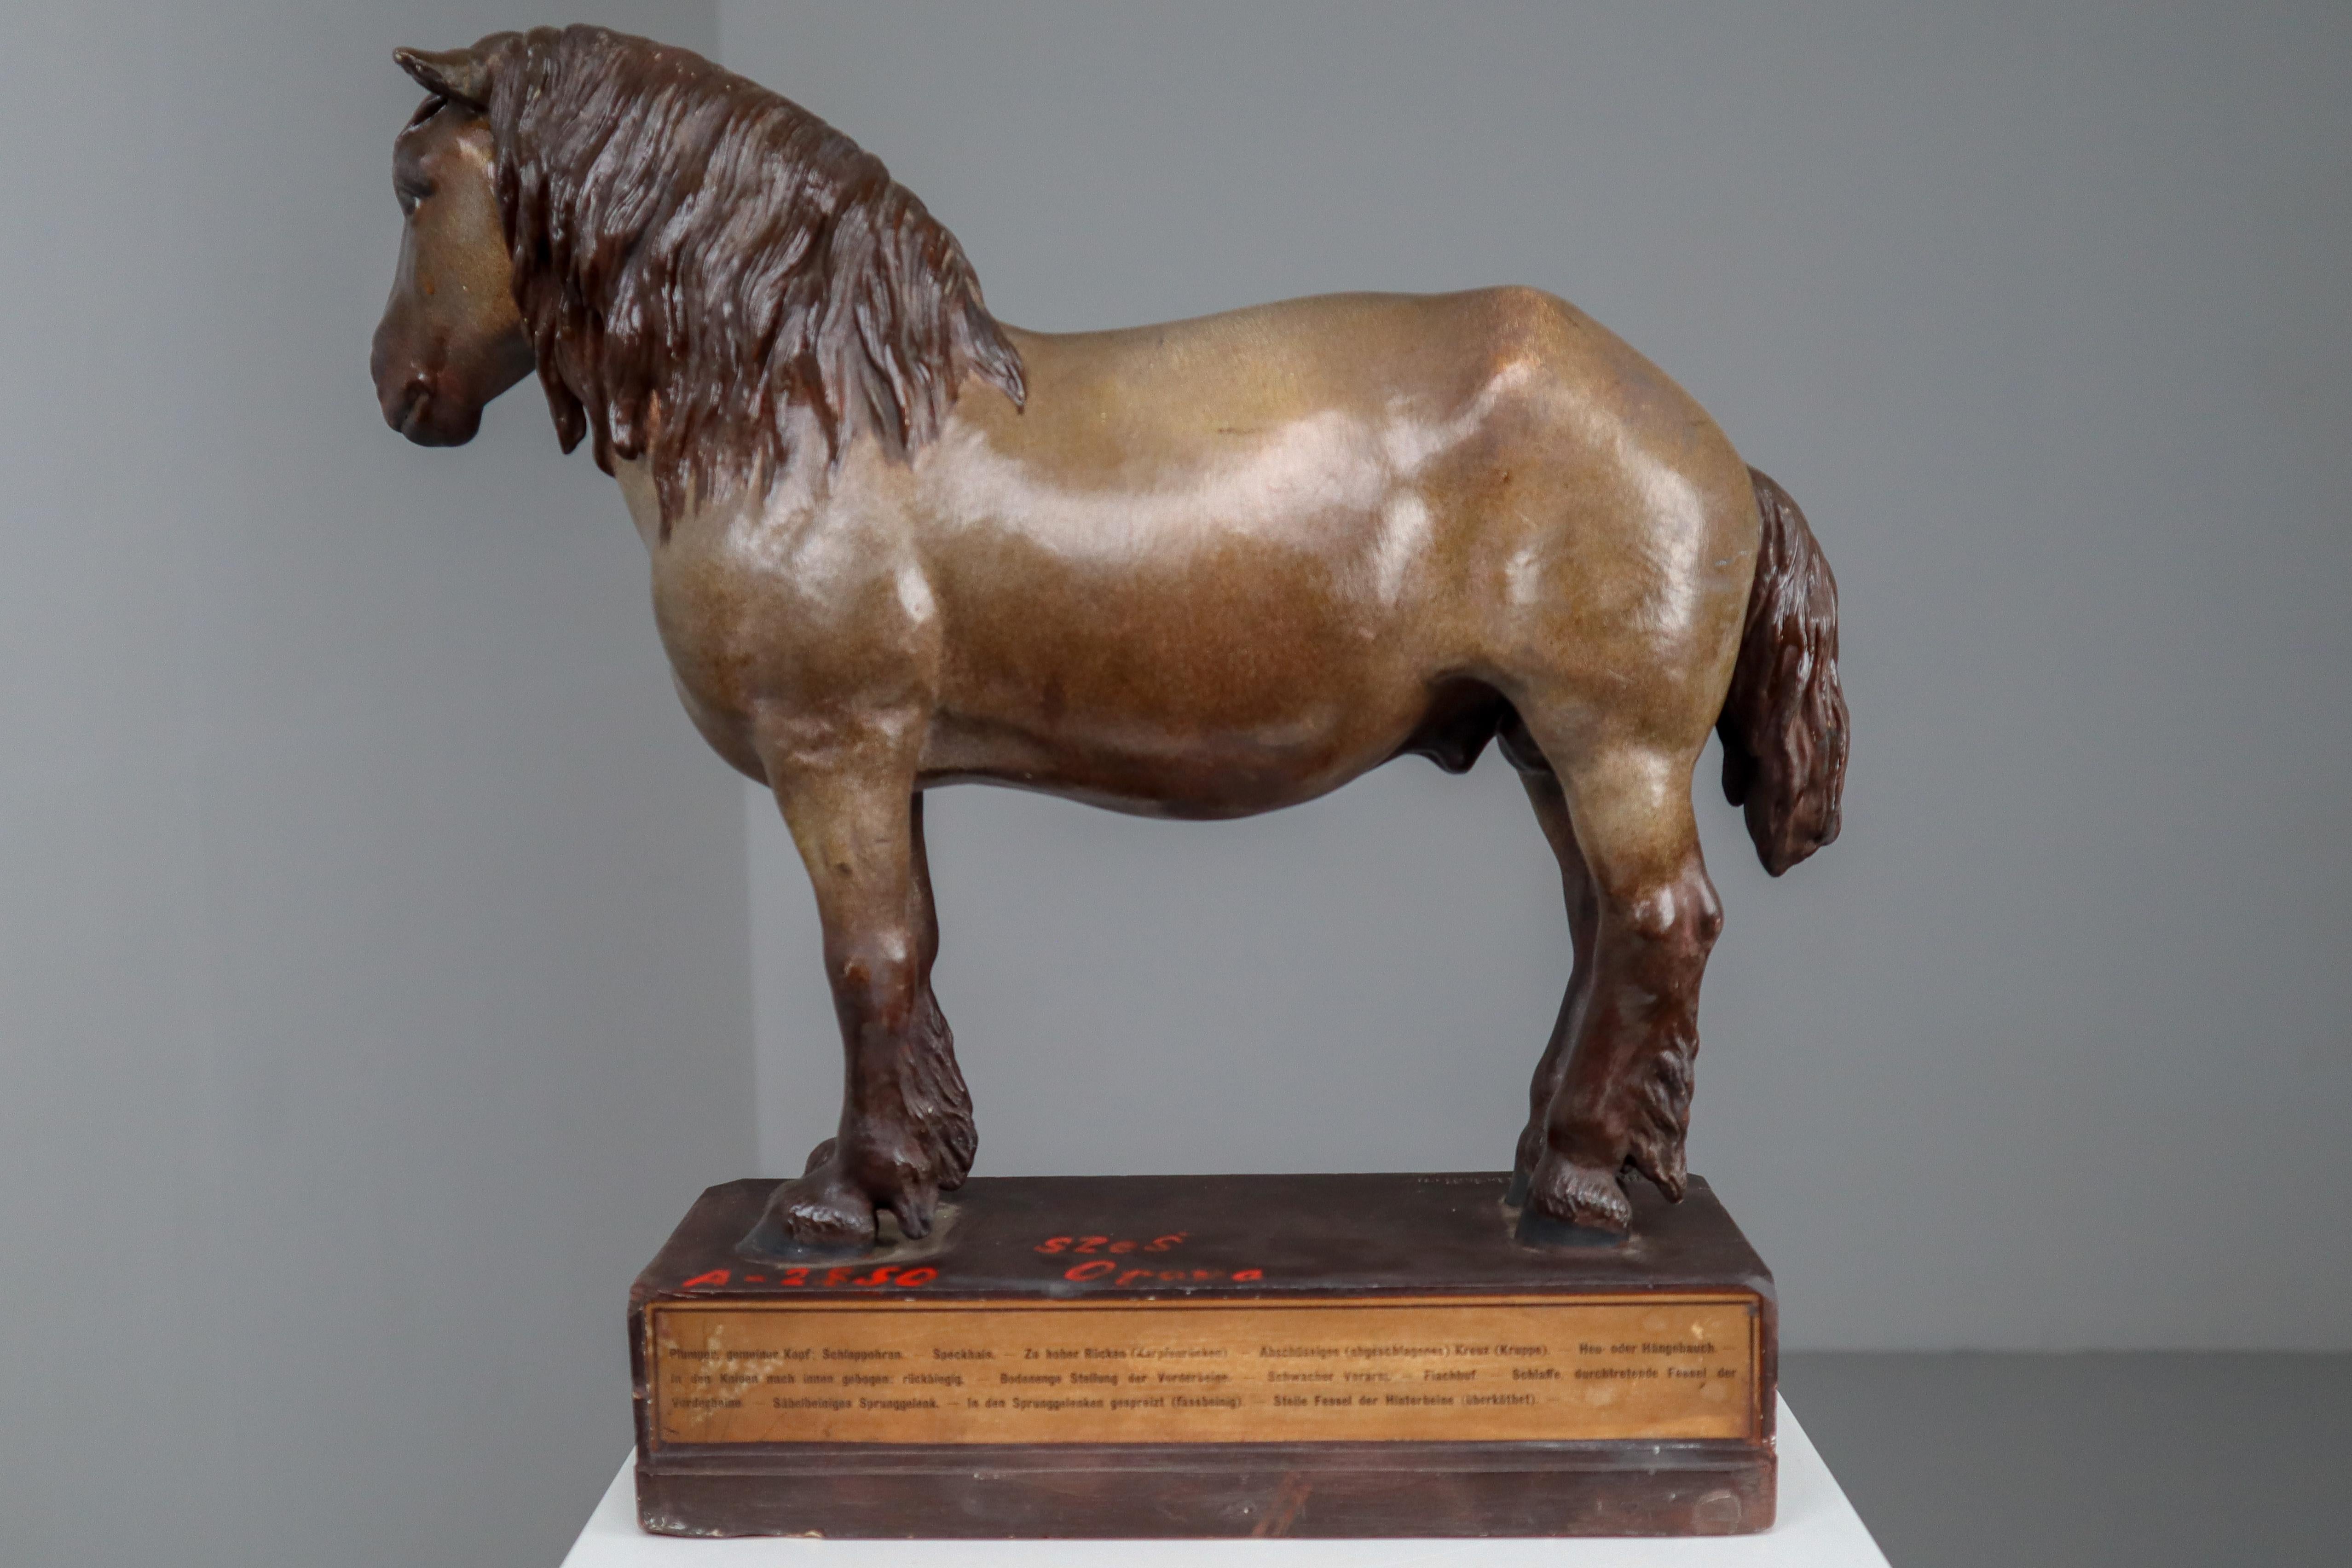 Cold Blood Horse Model in Painted Plaster by Max Landsberg, Berlin, 1885 3